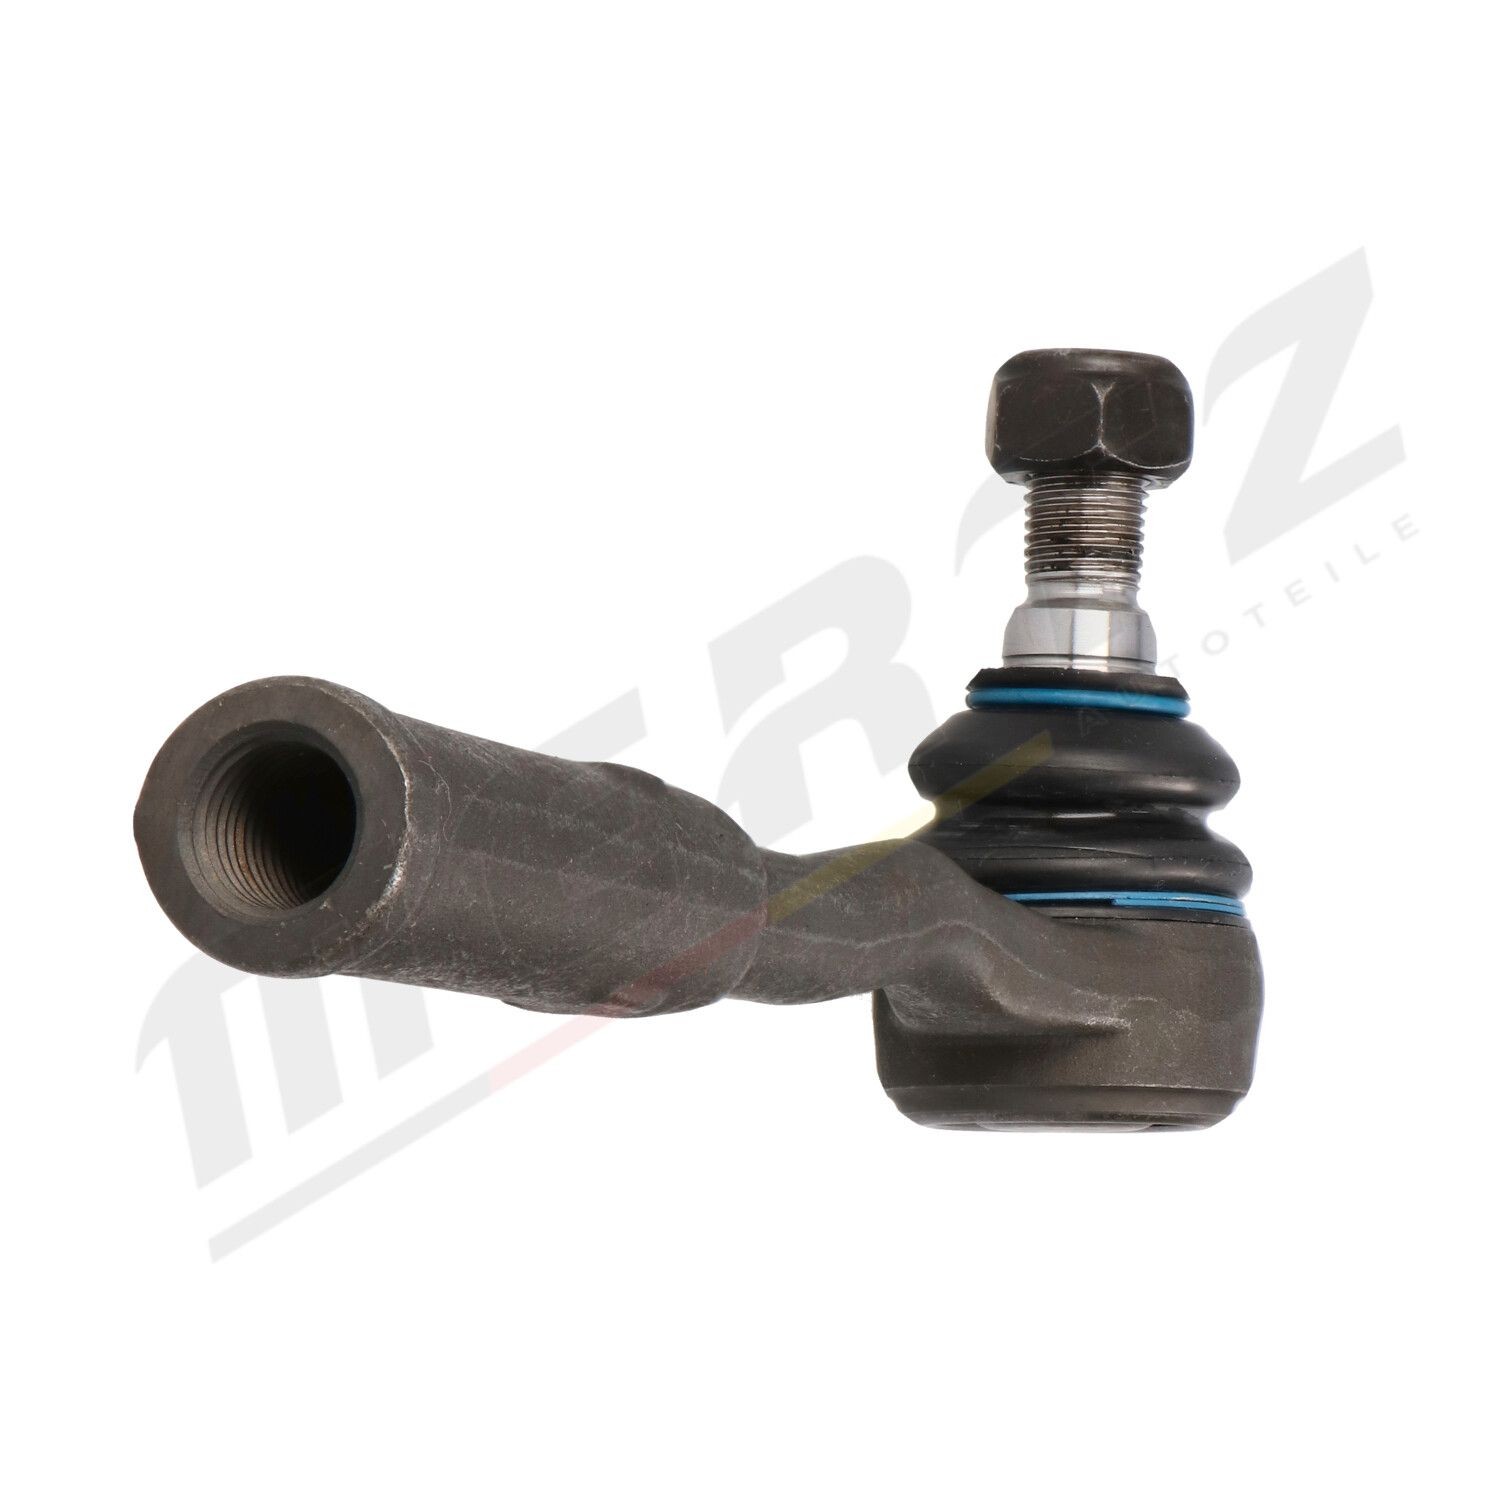 MERTZ M-S0705 Track rod end Front Axle Left, Front Axle Right, with self-locking nut